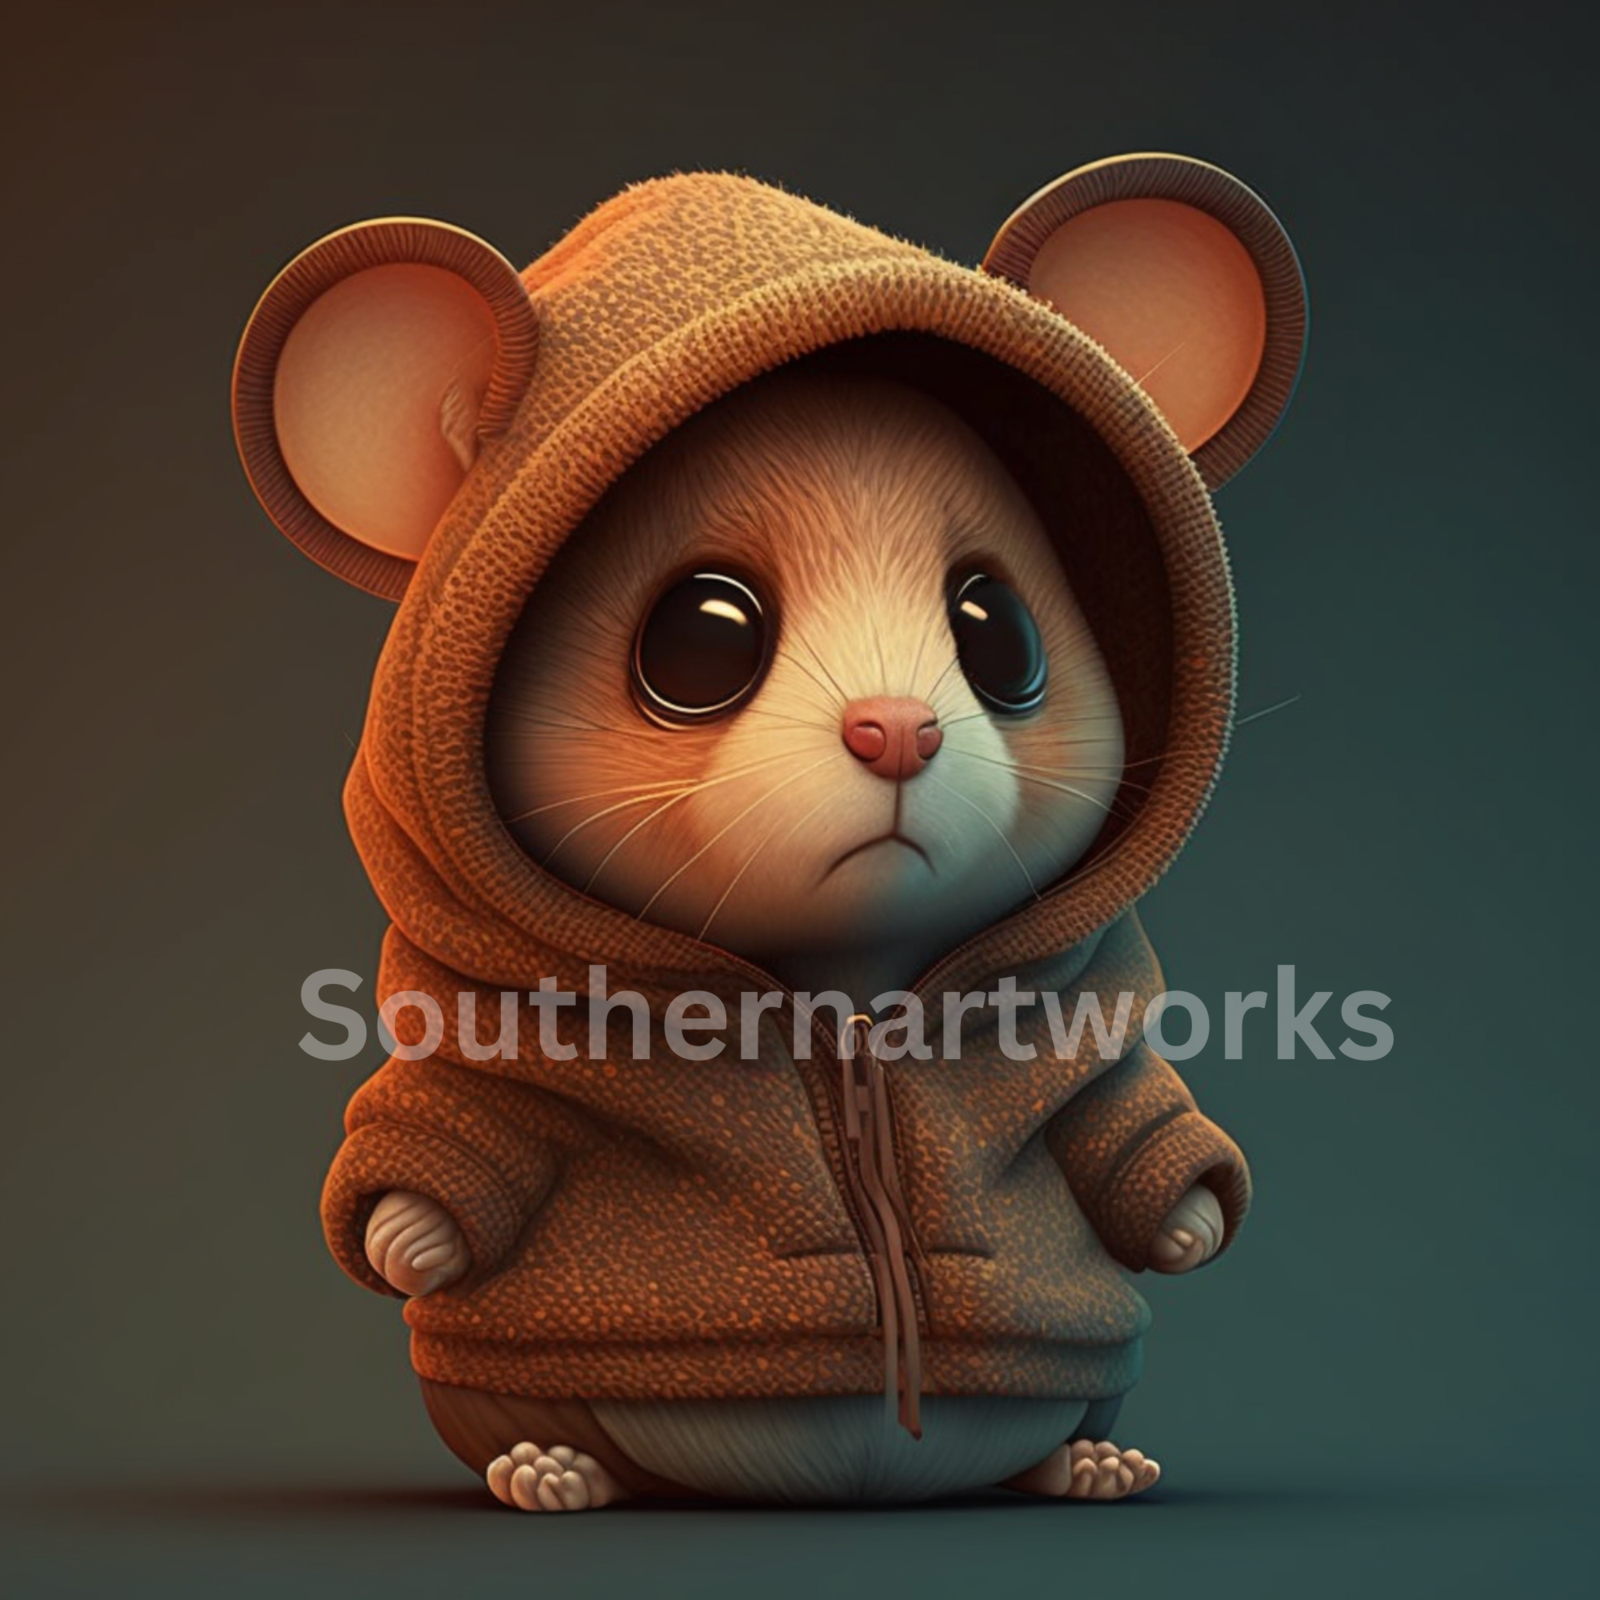 Primary image for A cute little mouse in a hoodie, wall art #1 of 7 in this collection.